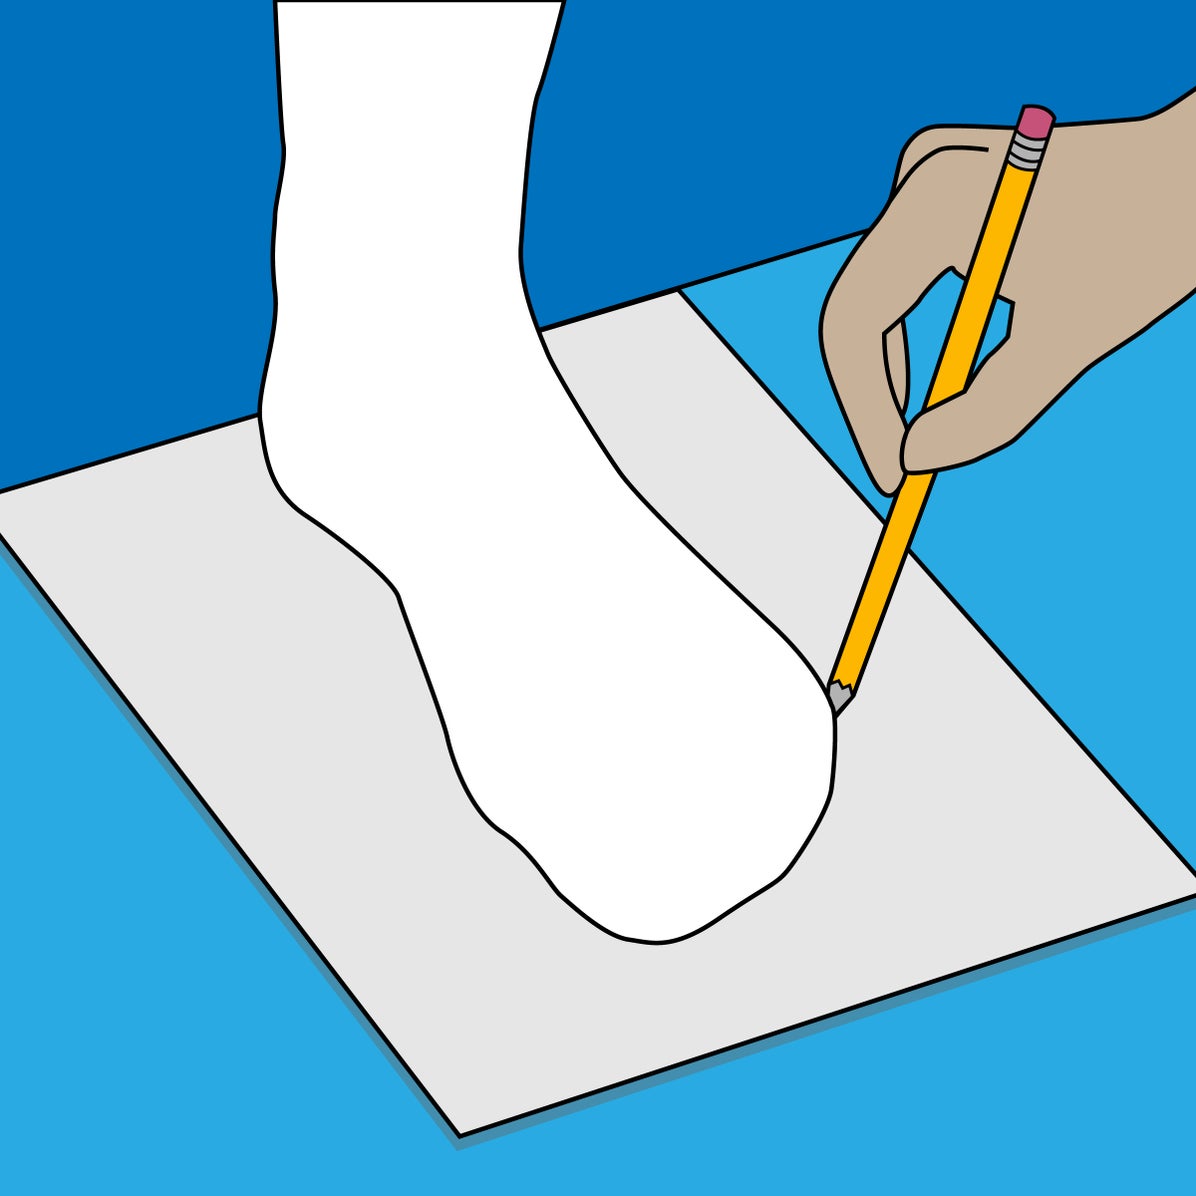 How to Measure Feet for Roller Skate Sizing